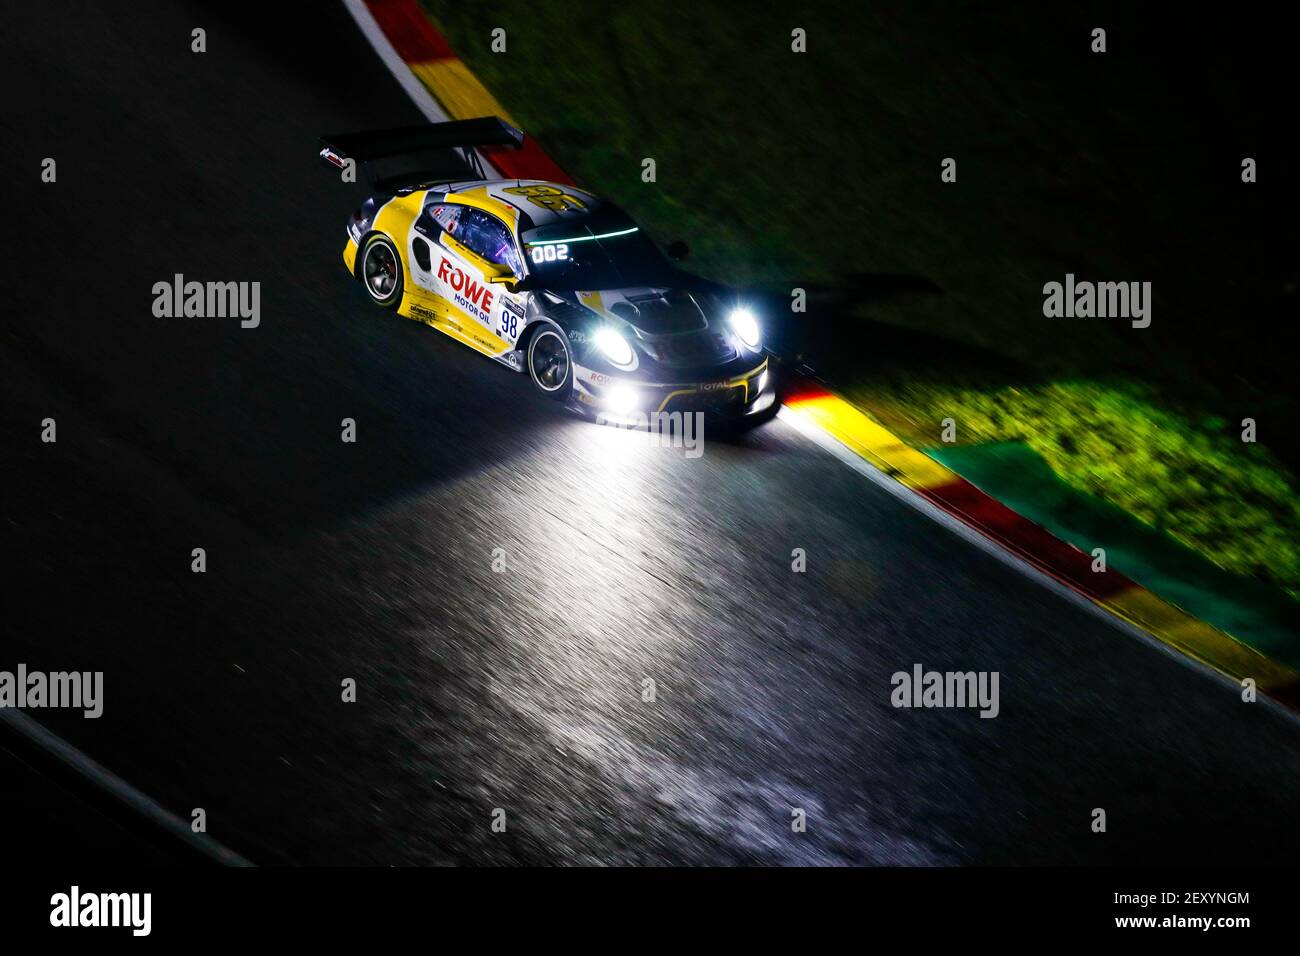 98 Tandy Nick (gbr), Earl (nzl), Vanthoor Laurens (bel), Rowe Racing, Porsche 911 GT3-R, action during the 2020 24 Hours of Spa, 3rd round of the World Endurance